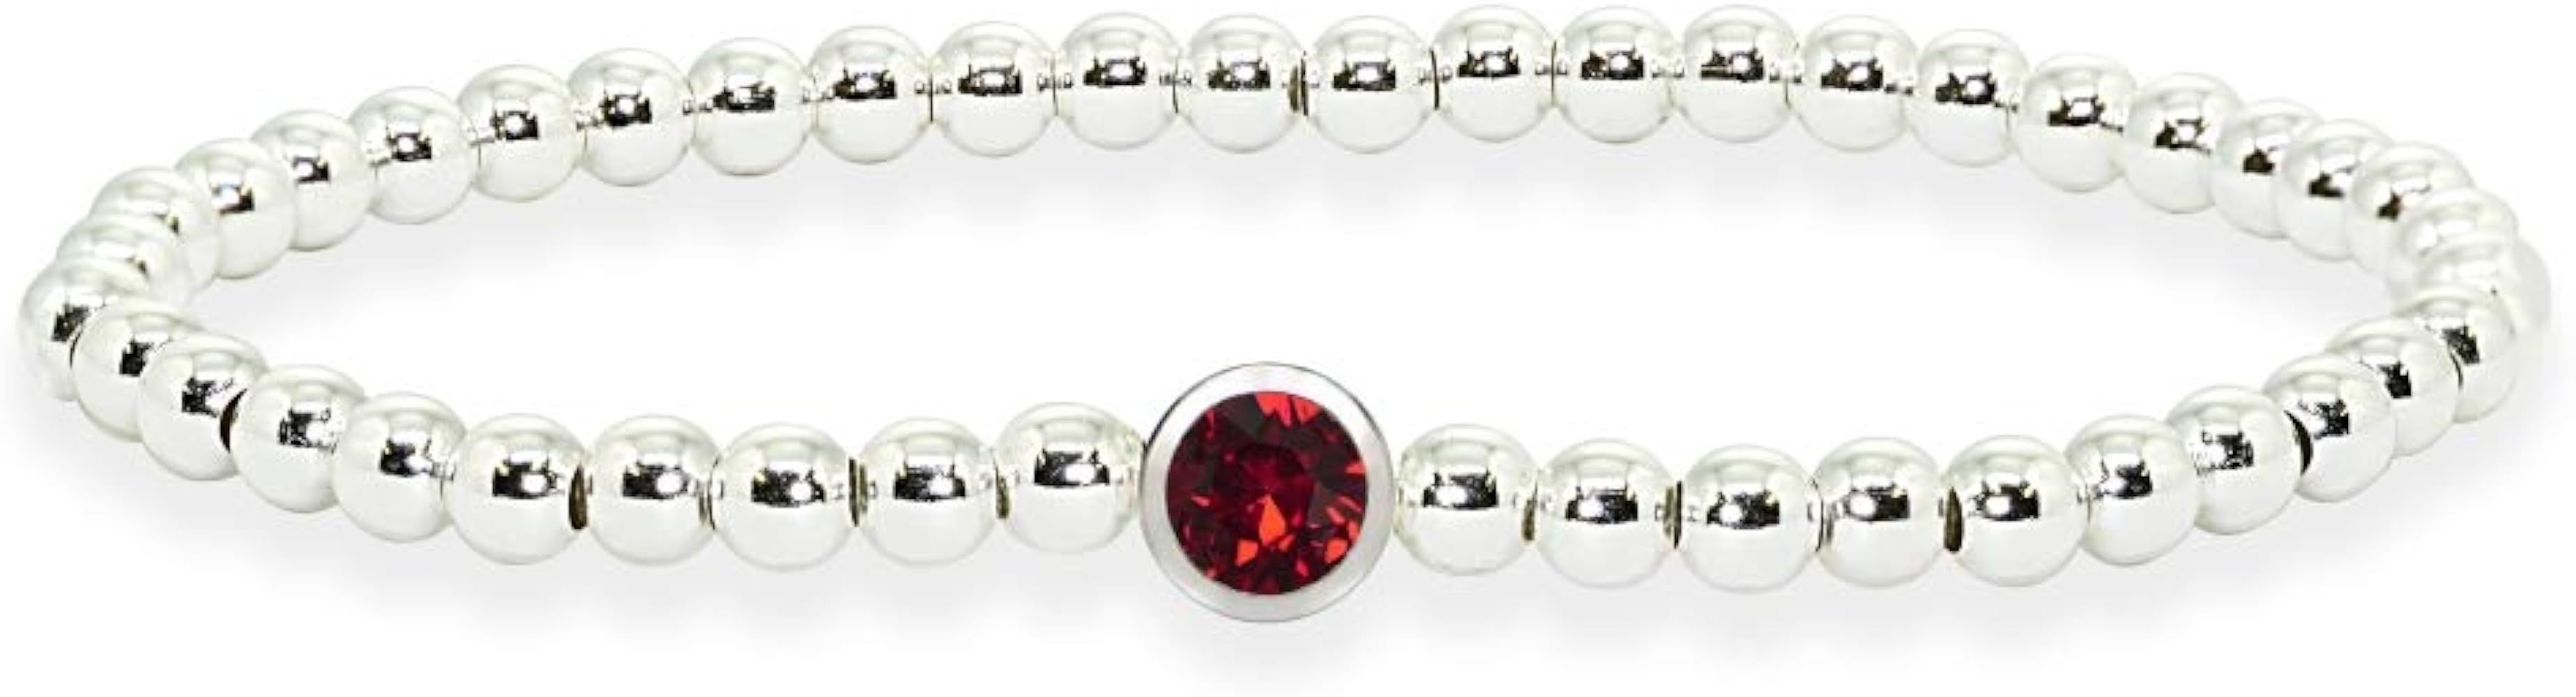 B. BRILLIANT Sterling Silver Polished Beads & Crystal Stretch Stackable Bracelet for Women Girls | Amazon (US)